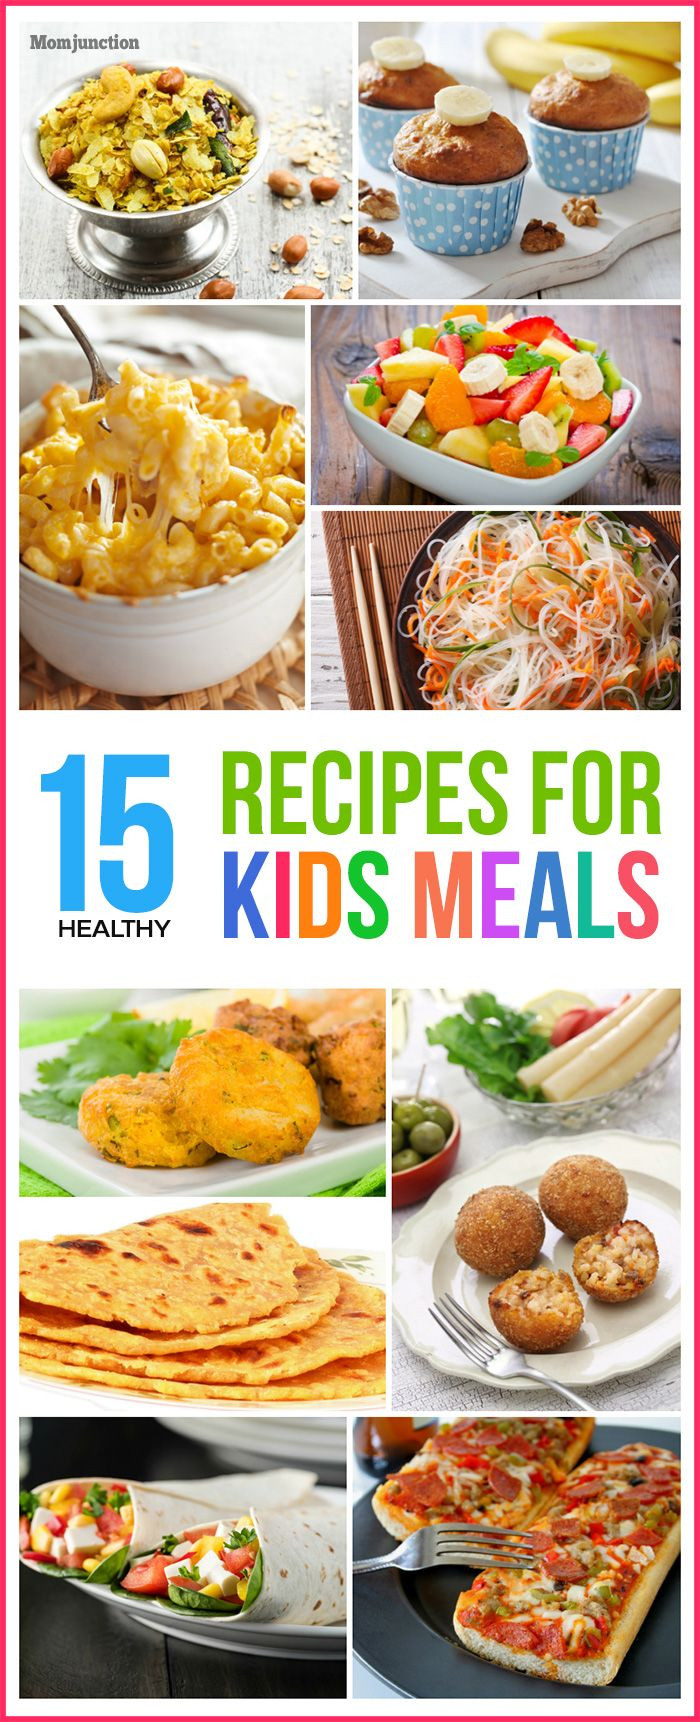 Healthy Kid Friendly Dinner Recipes
 Top 15 Healthy Recipes For Kids Meals